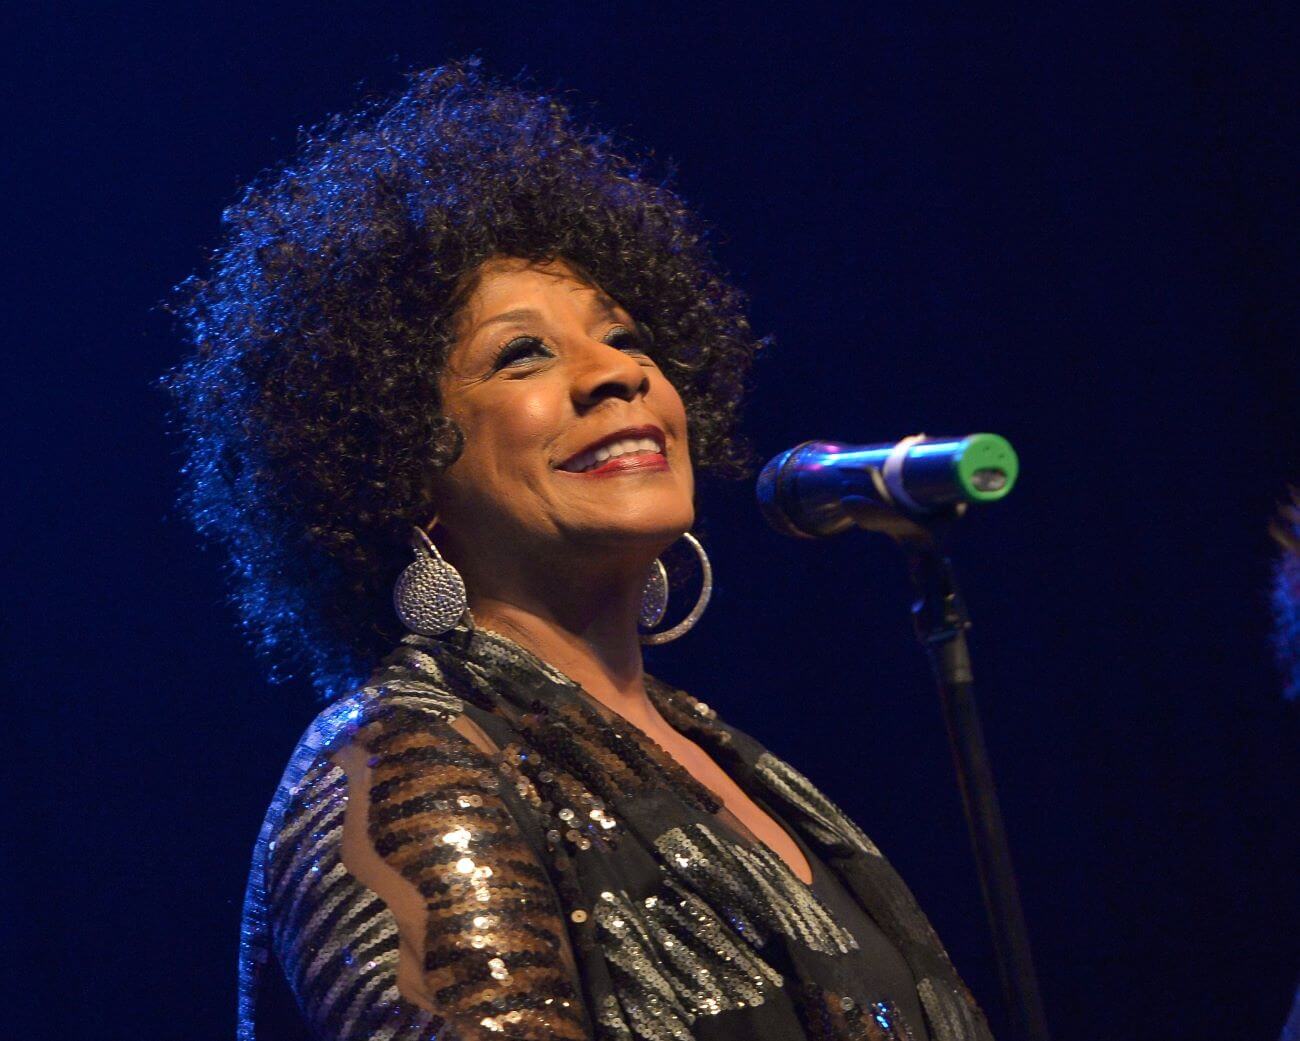 Merry Clayton wears a sequined shirt and stands in front of a microphone.